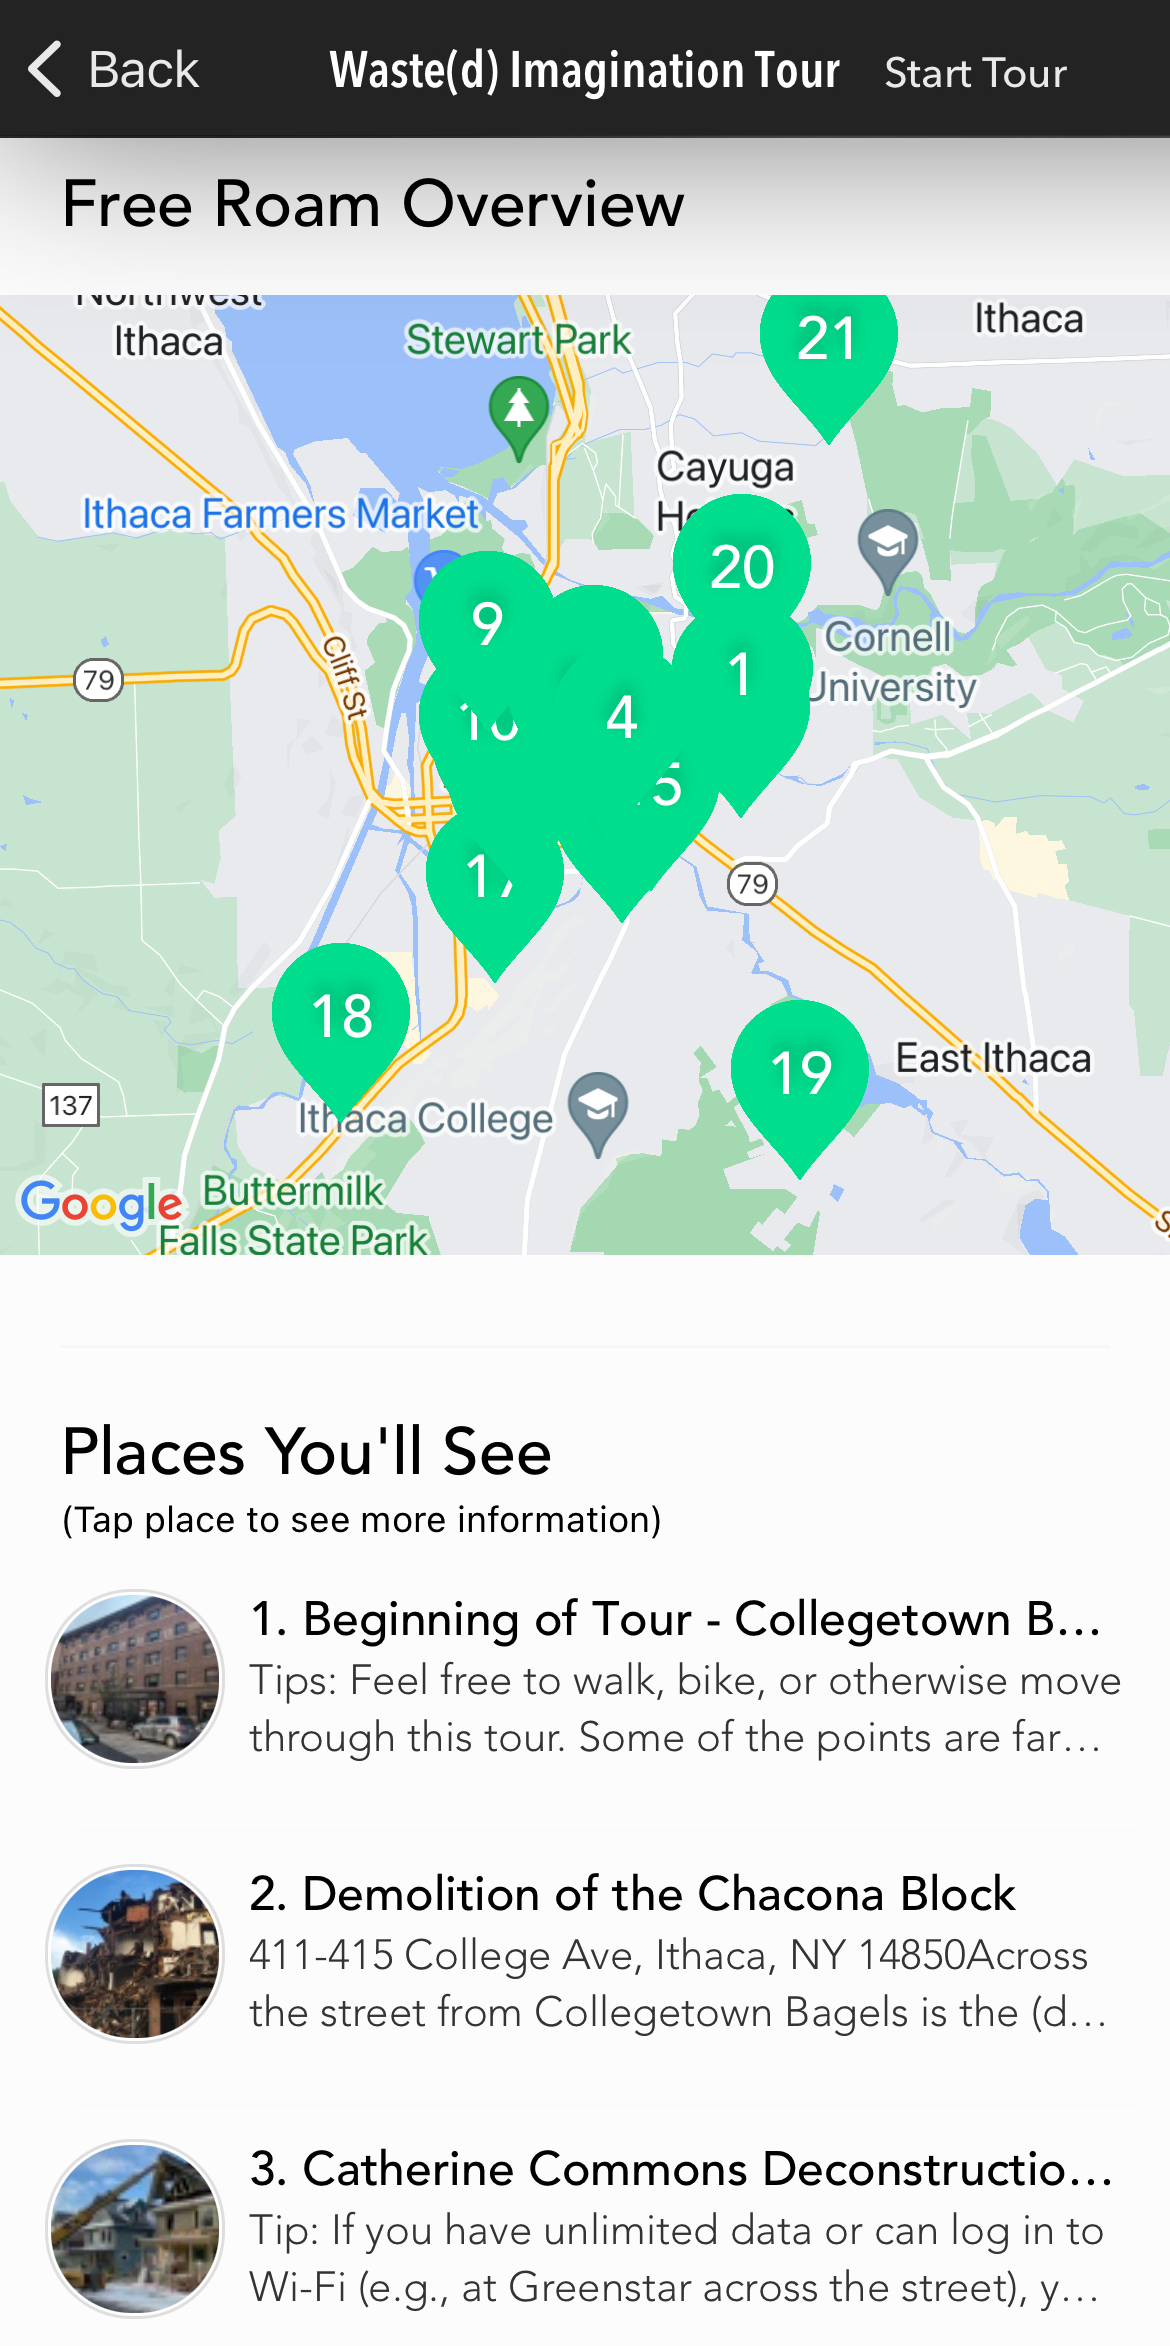 https://aap.cornell.edu/screen%20shot%20of%20a%20cell%20phone%20screen%20showing%20a%20map%20with%20multiple%20pins